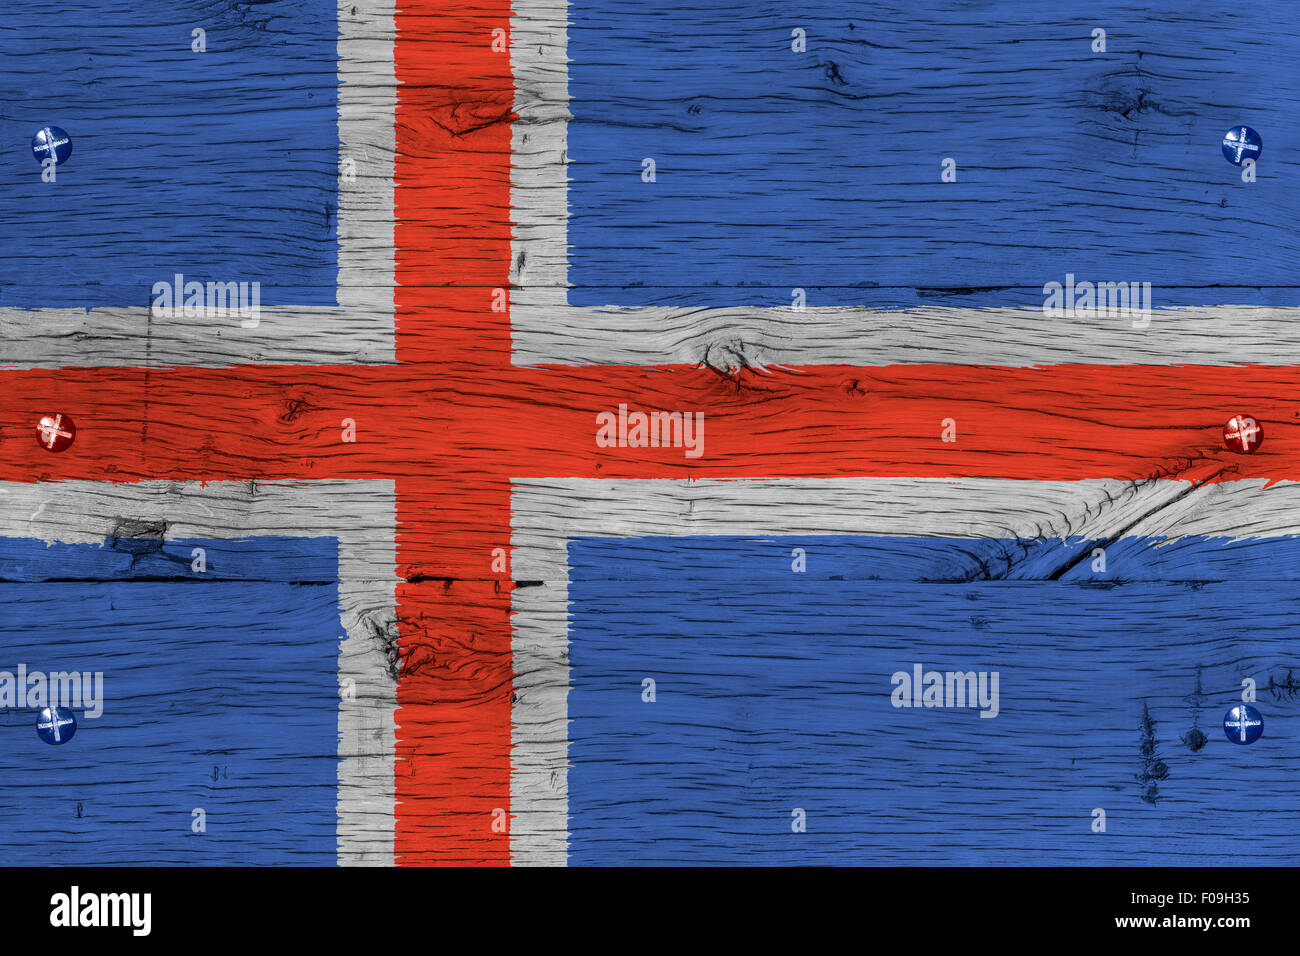 Iceland national flag. Painting is colorful on wood of old train carriage. Fastened by screws or bolts. Stock Photo